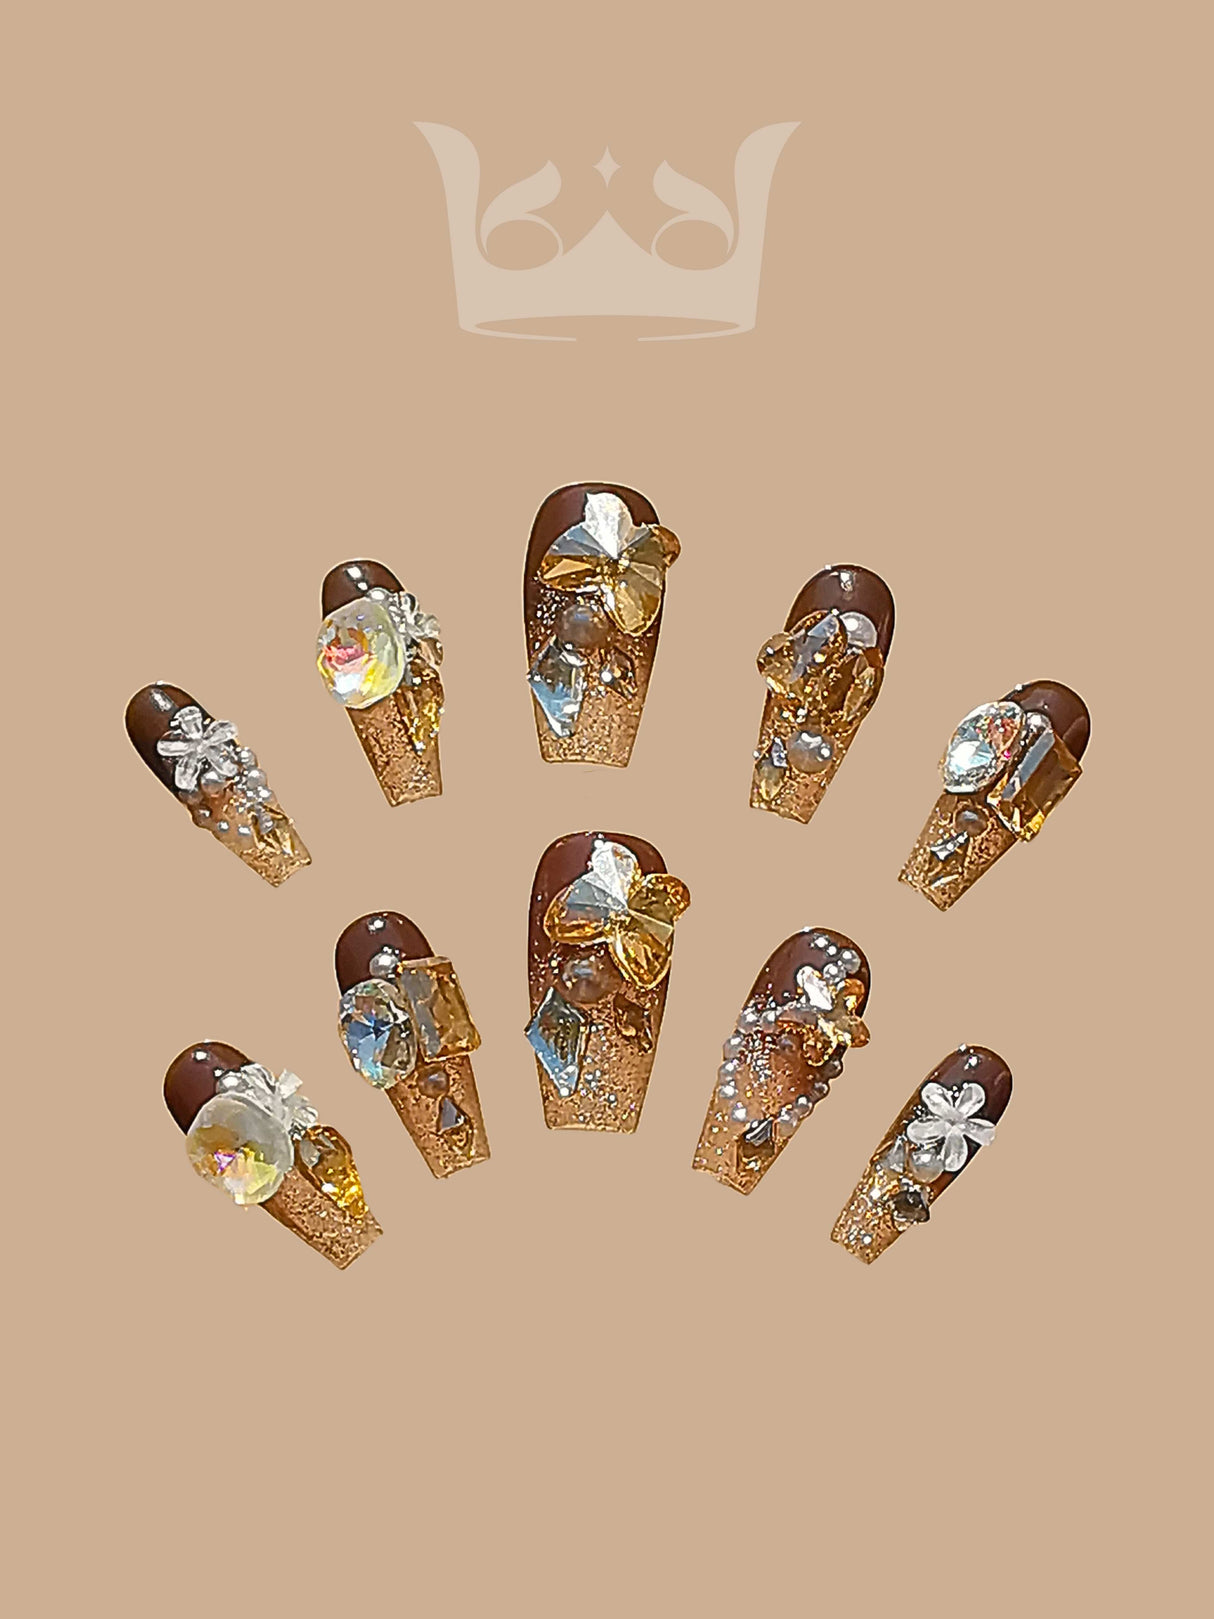 Opulent nails with warm, golden-brown base color, glitter, rhinestones, gems, and 3D embellishments. Coffin shape and length add to luxurious feel. Ideal for special occasions.